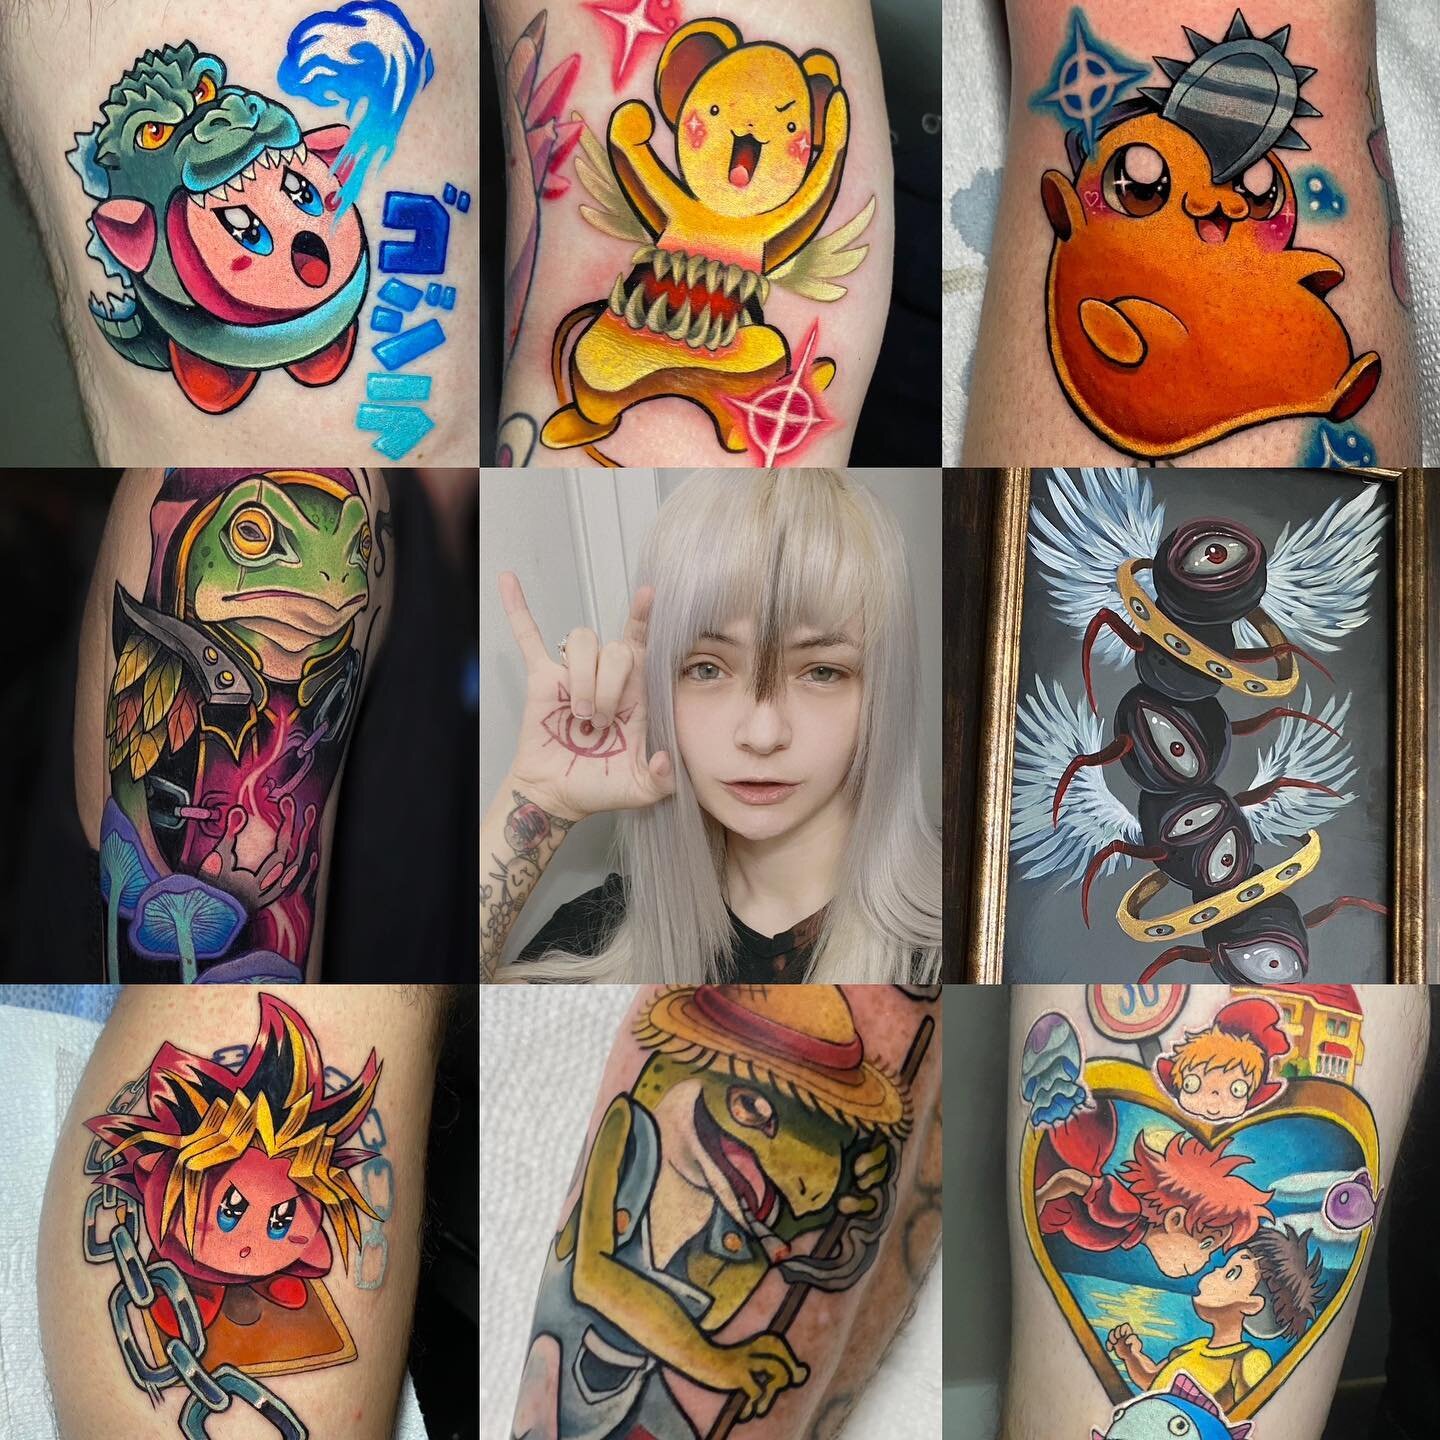 Art vs artist 2023 🤠🤘 
Lots of amazing changes this year, and I&rsquo;m so stoked for next year! ⭐️ thank you everyone who&rsquo;s been apart of it &hearts;️

#tattoo #artvsartist #tattoo #tattooartist #qttr #massachusetts #capecod